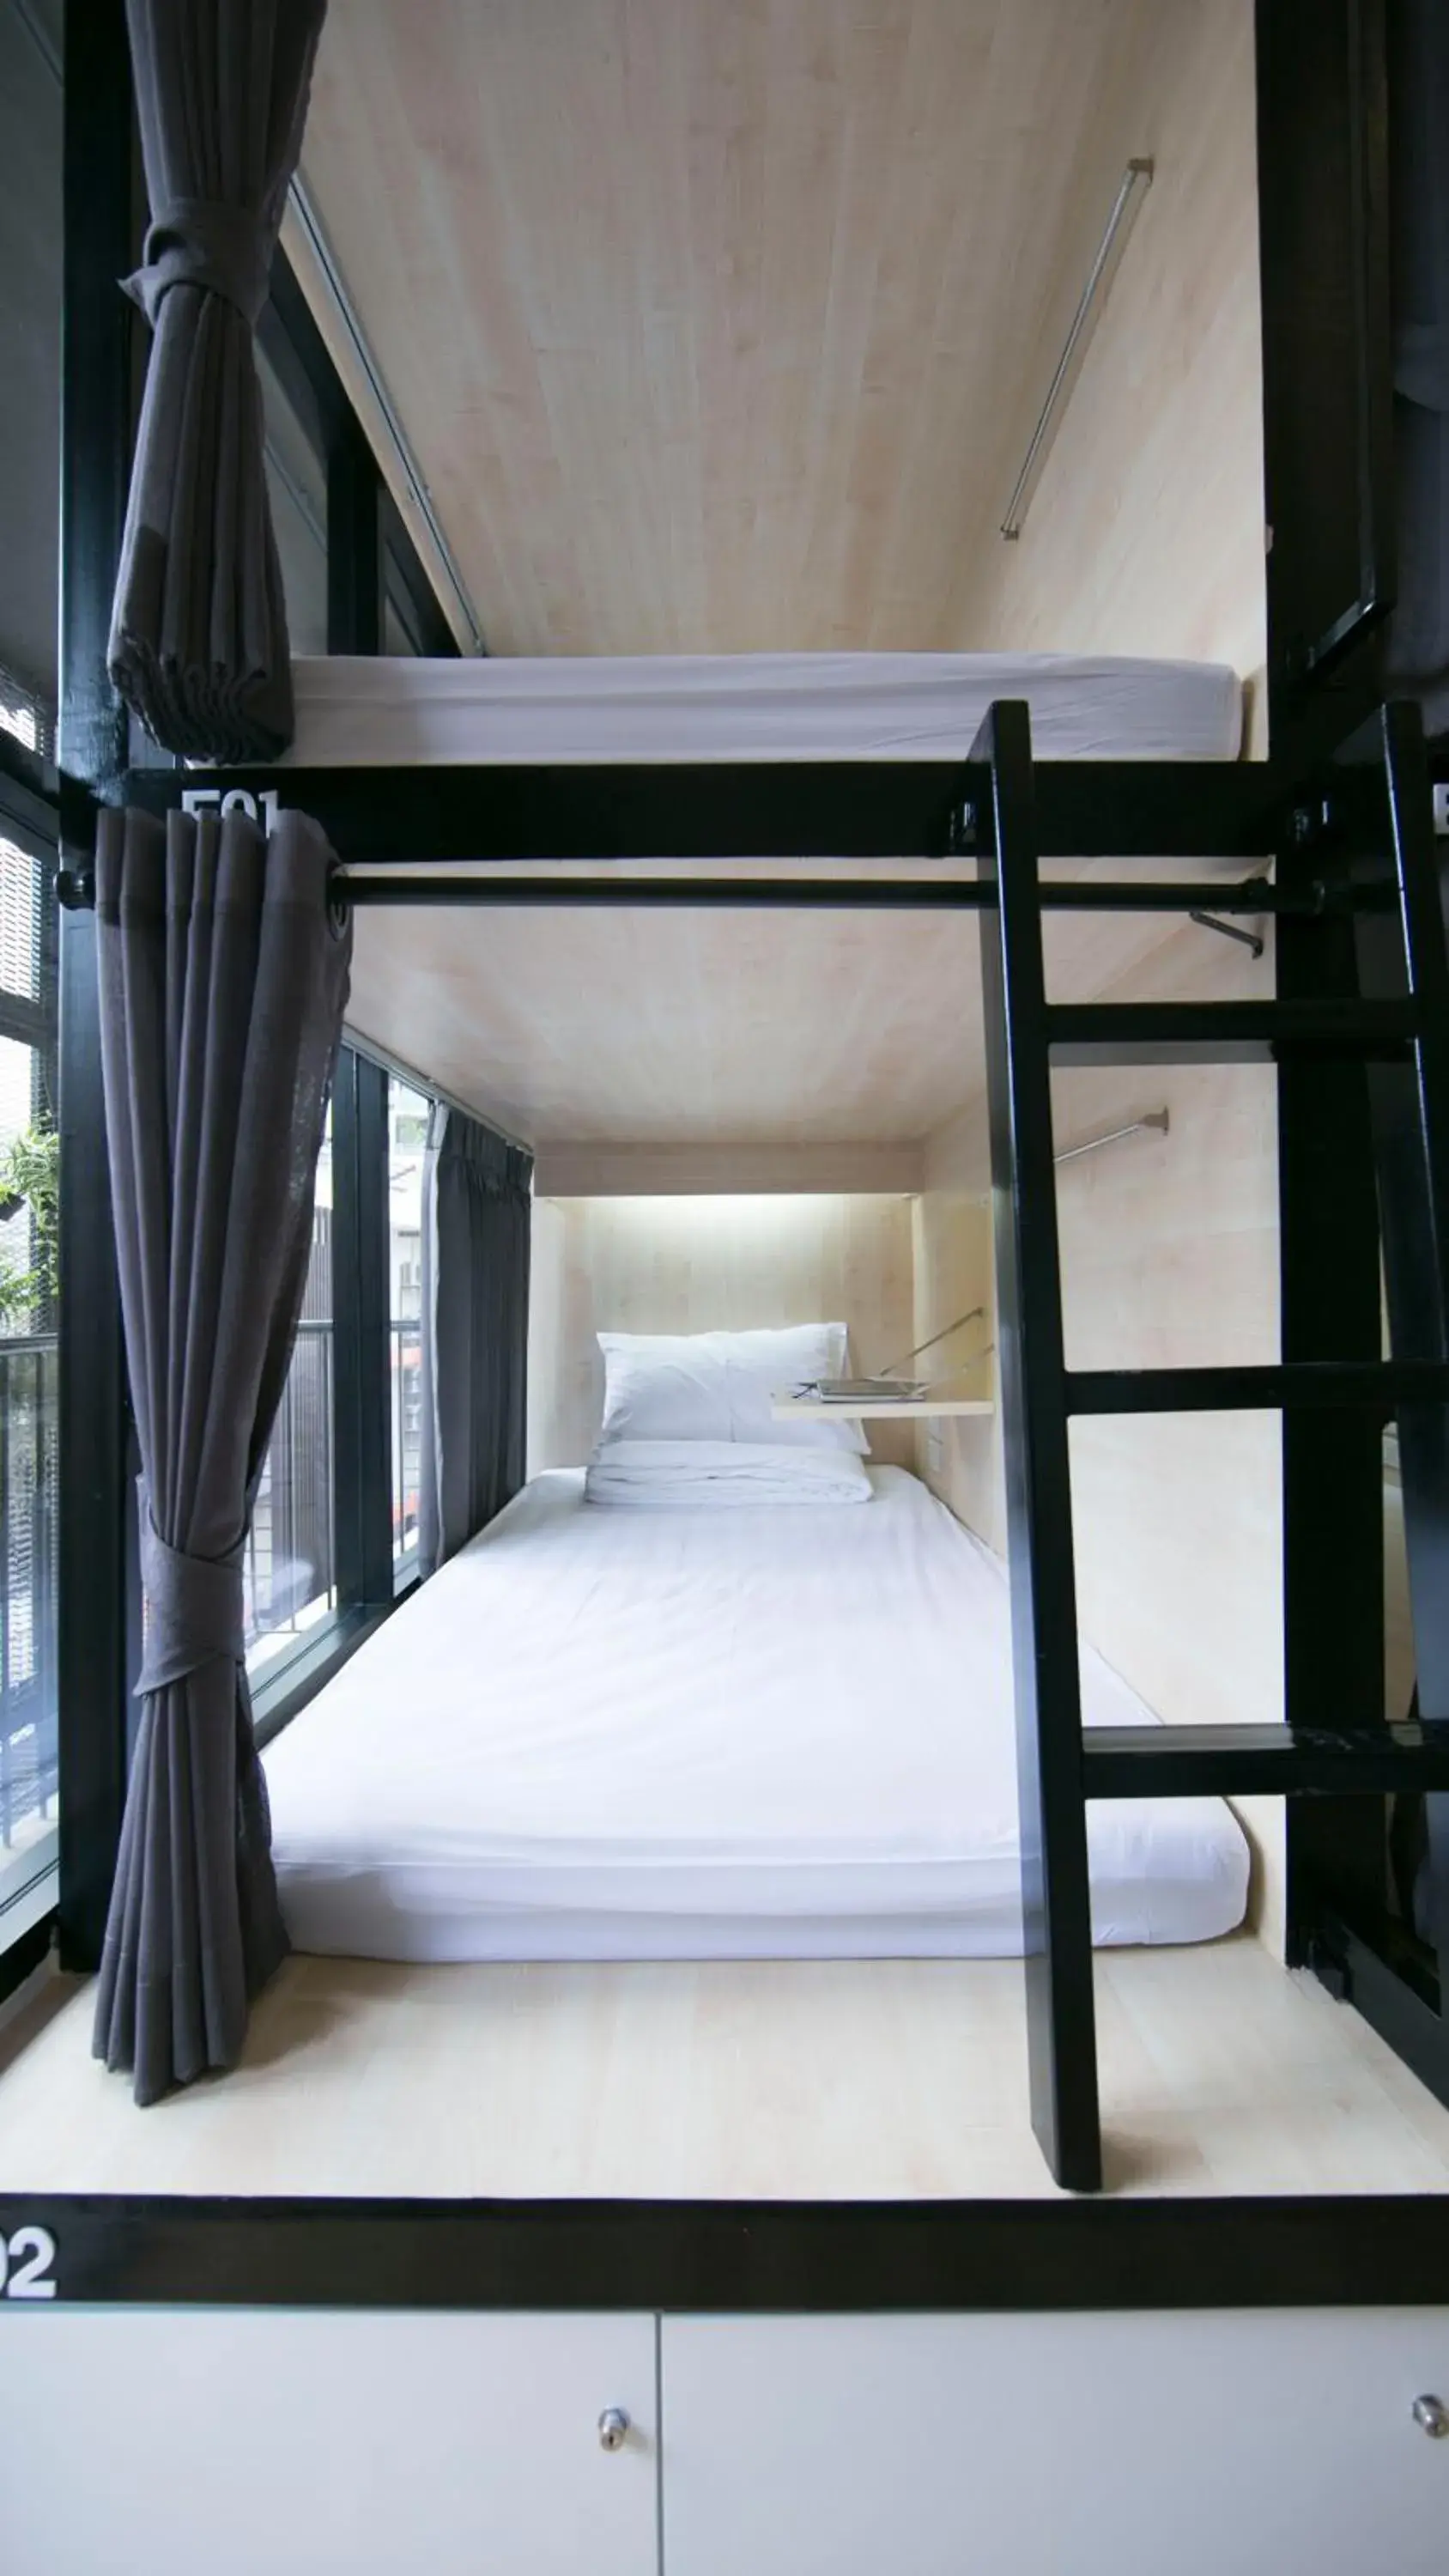 Bed in 8-Bed Mixed Dormitory Room in Lamurr Sukhumvit 41 Hostel